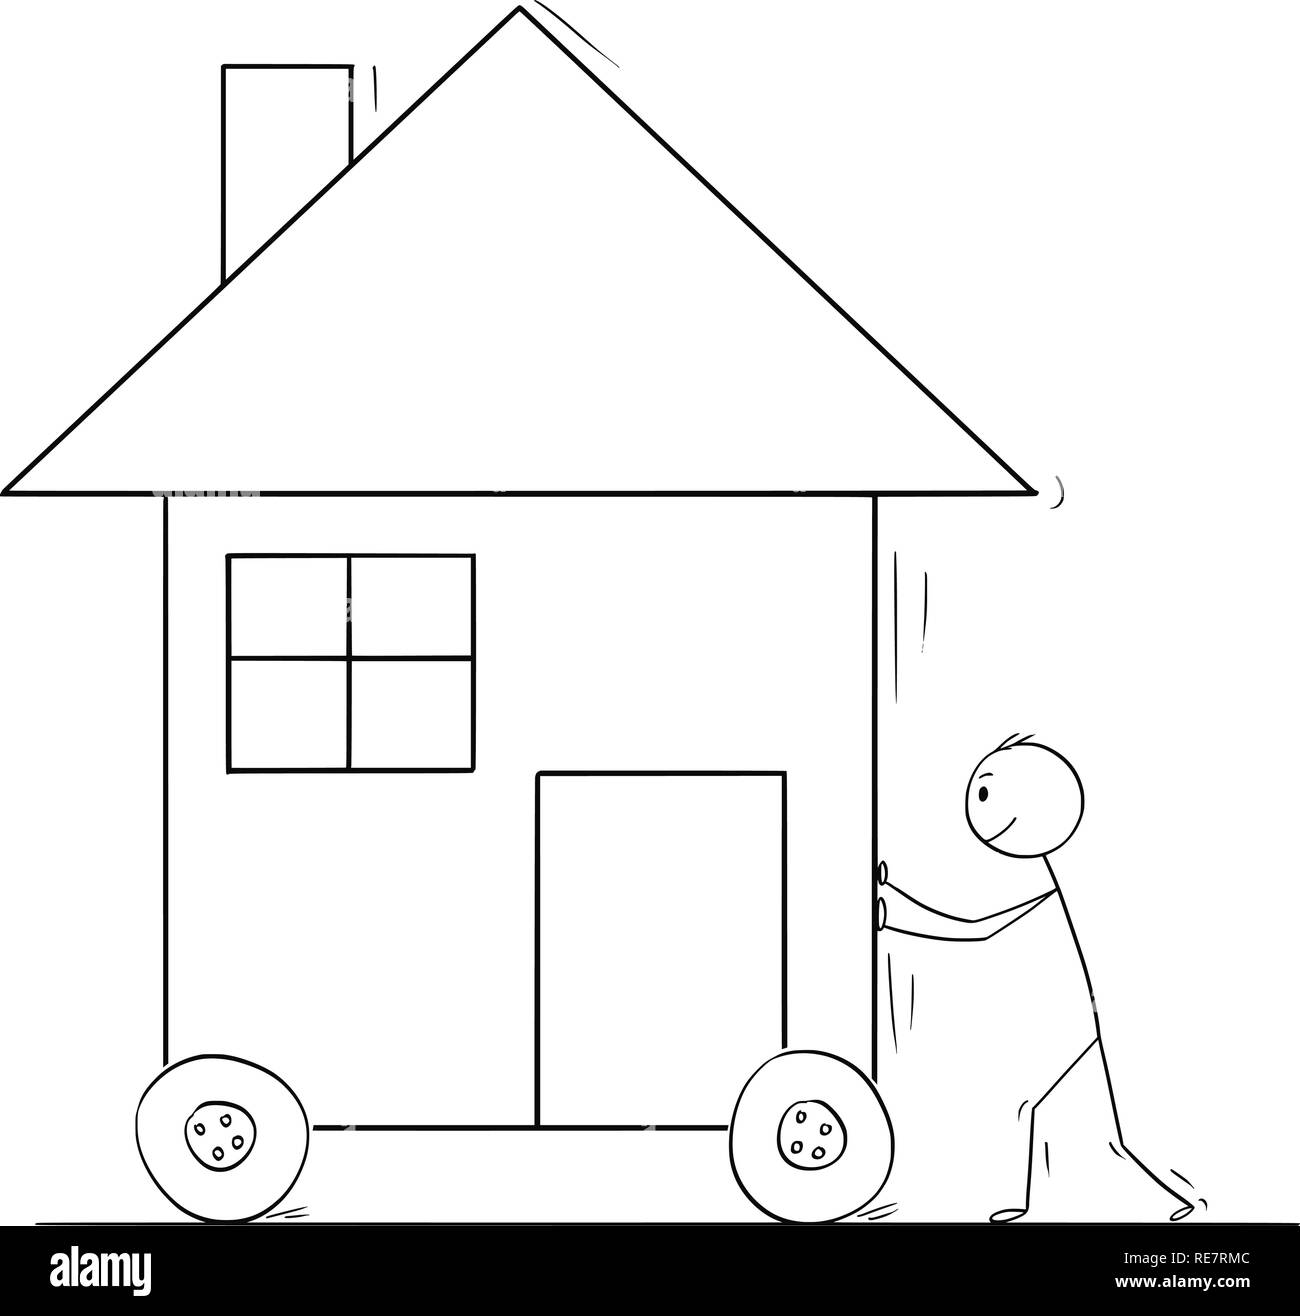 Cartoon of Man Pushing or Moving Family House on Wheels Stock Vector